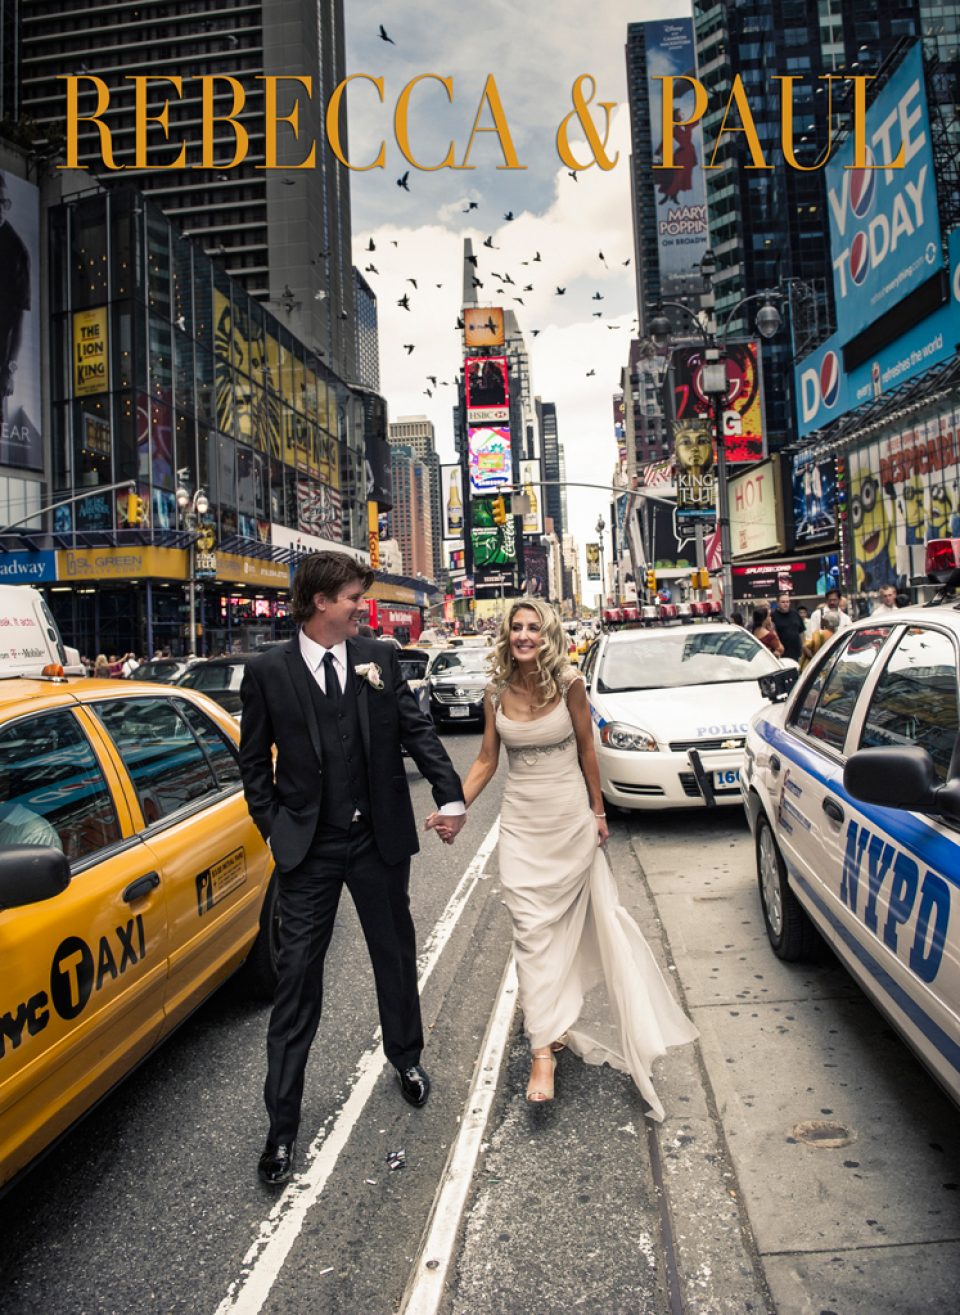 smiling couple on wedding day. walking on the road in new york city, between a yellow cab and a police car.